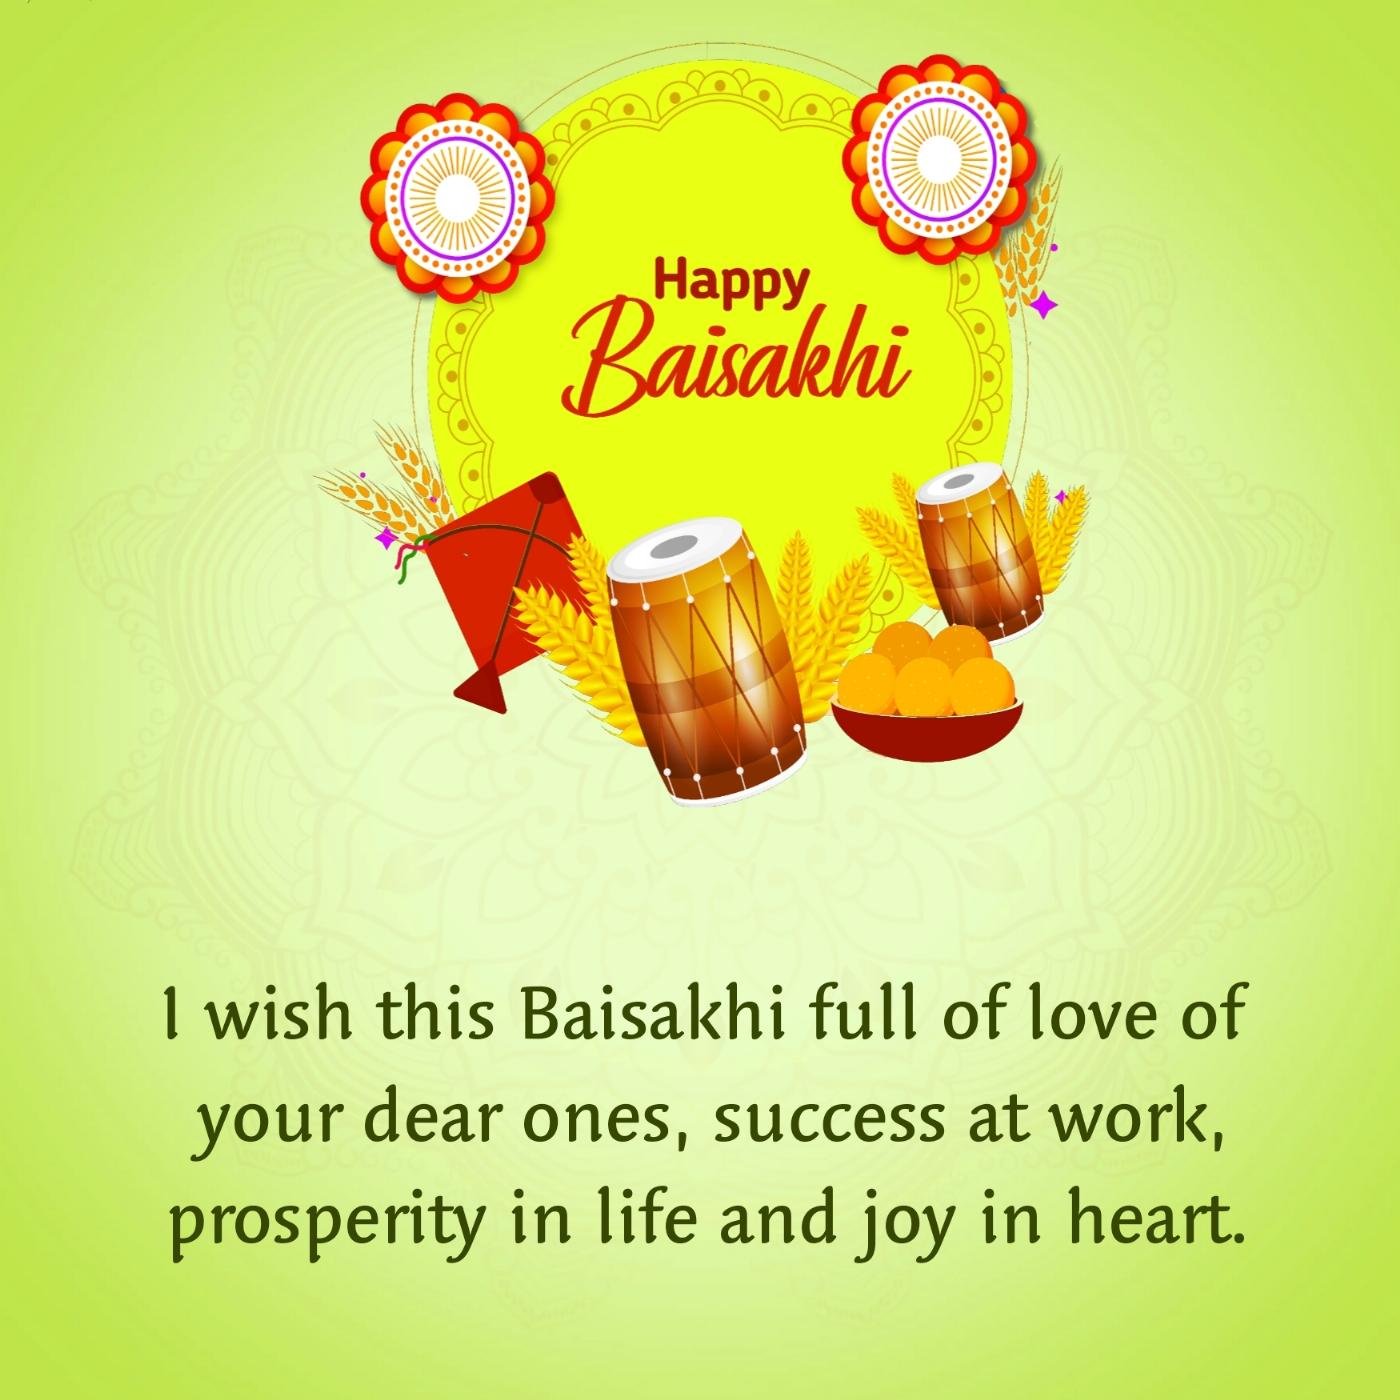 I wish this Baisakhi full of love of your dear ones